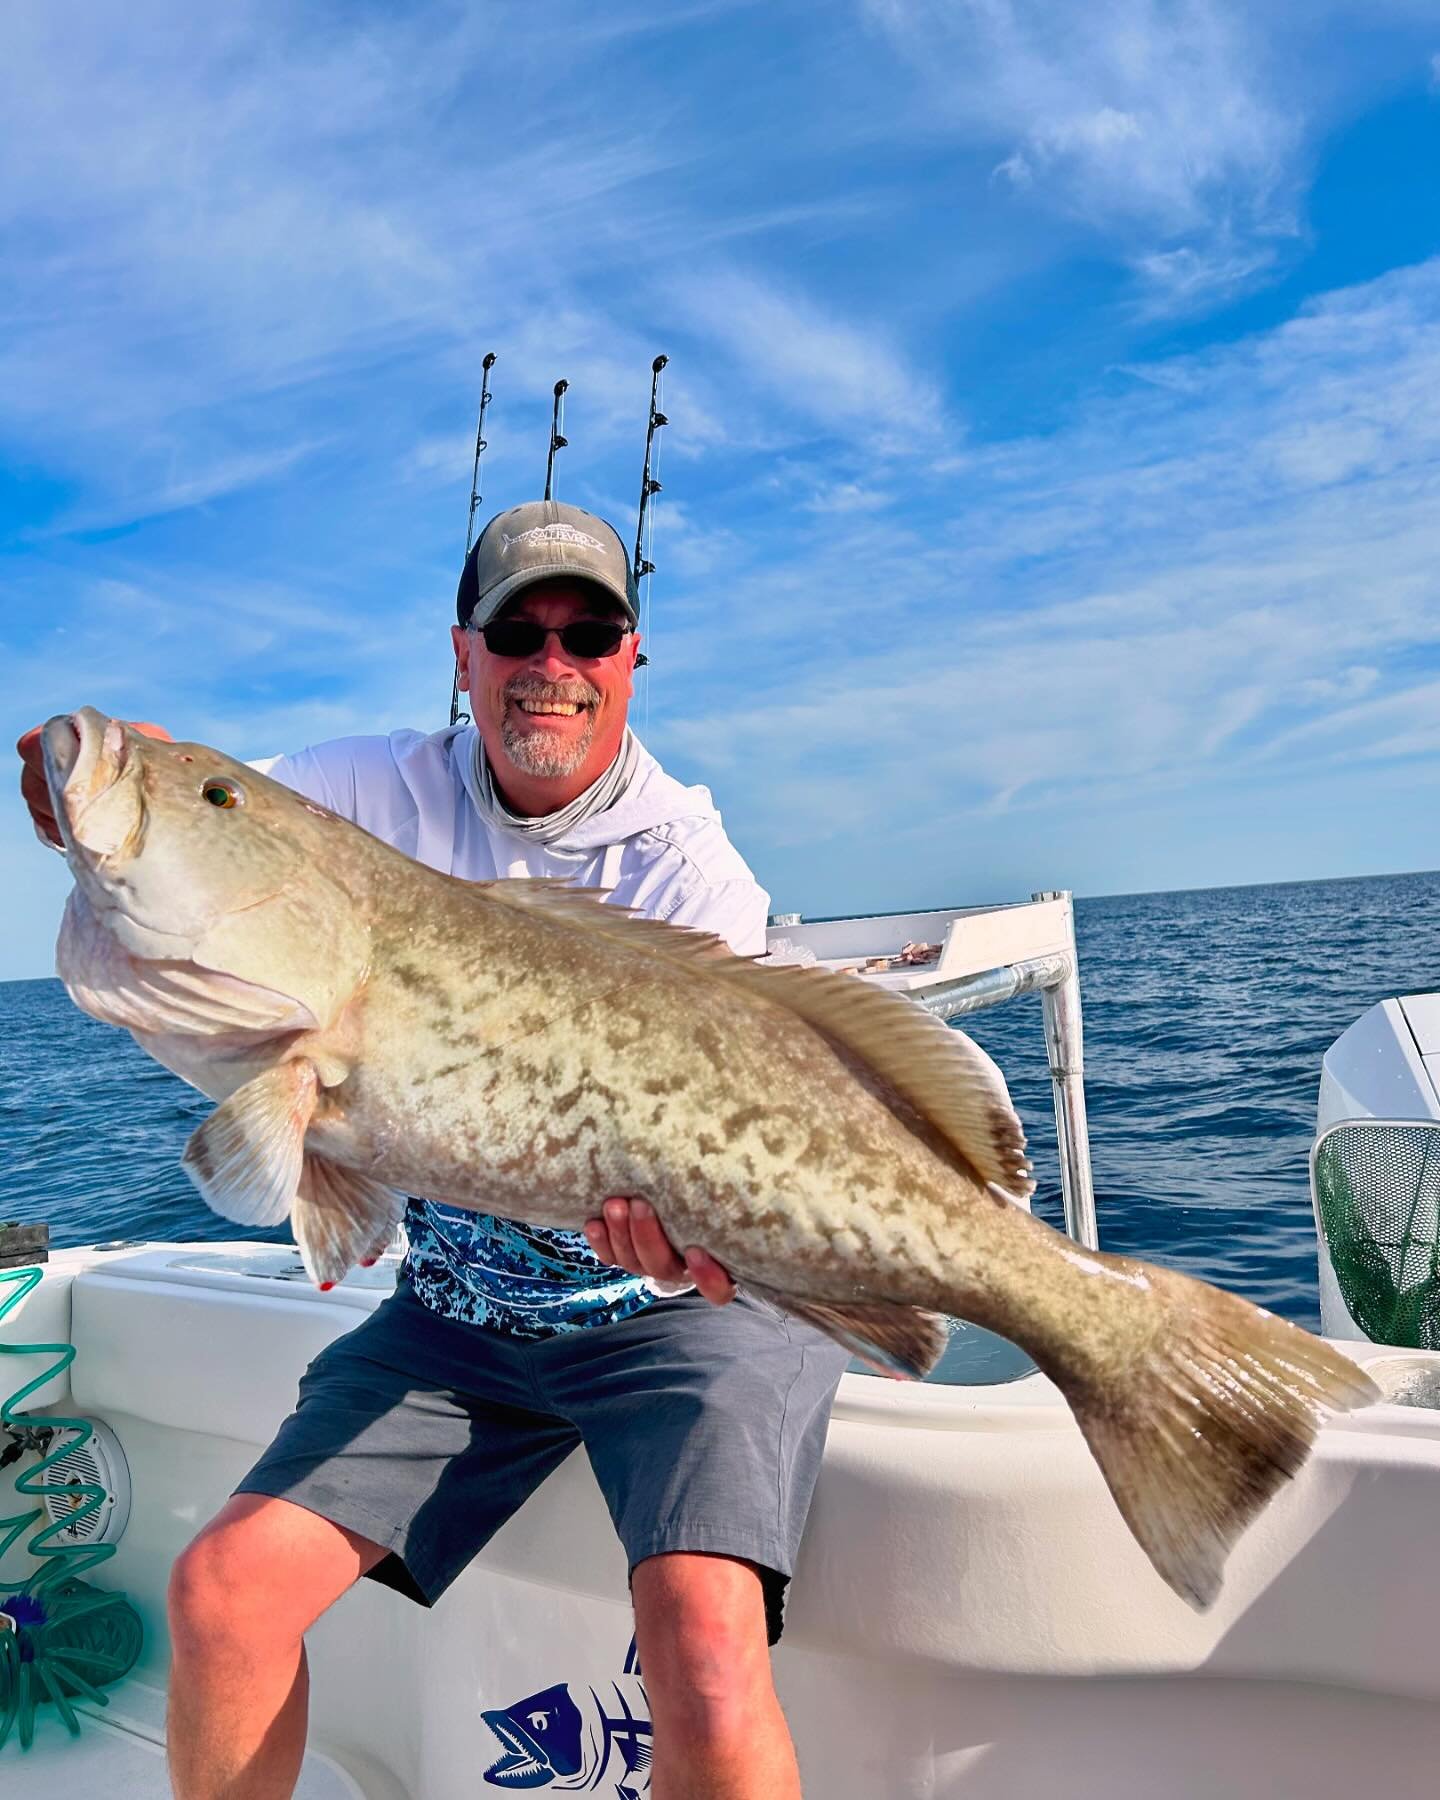 Big bites this season!!🔥💥
.
.
@SaltFeverGuideService&mdash;&gt; 910.250.3021
.
.
LIKE OUR PAGE TO FOLLOW THE SQUAD
🇺🇸🐟🇺🇸🐟🇺🇸🐟🇺🇸🐟🇺🇸🐟🇺🇸🐟🇺🇸🐟
.
@AmericanAquatic
.
.
| #SaltFeverGuideService | #AmericanAquatic | #OceanIsleBeachNc | #